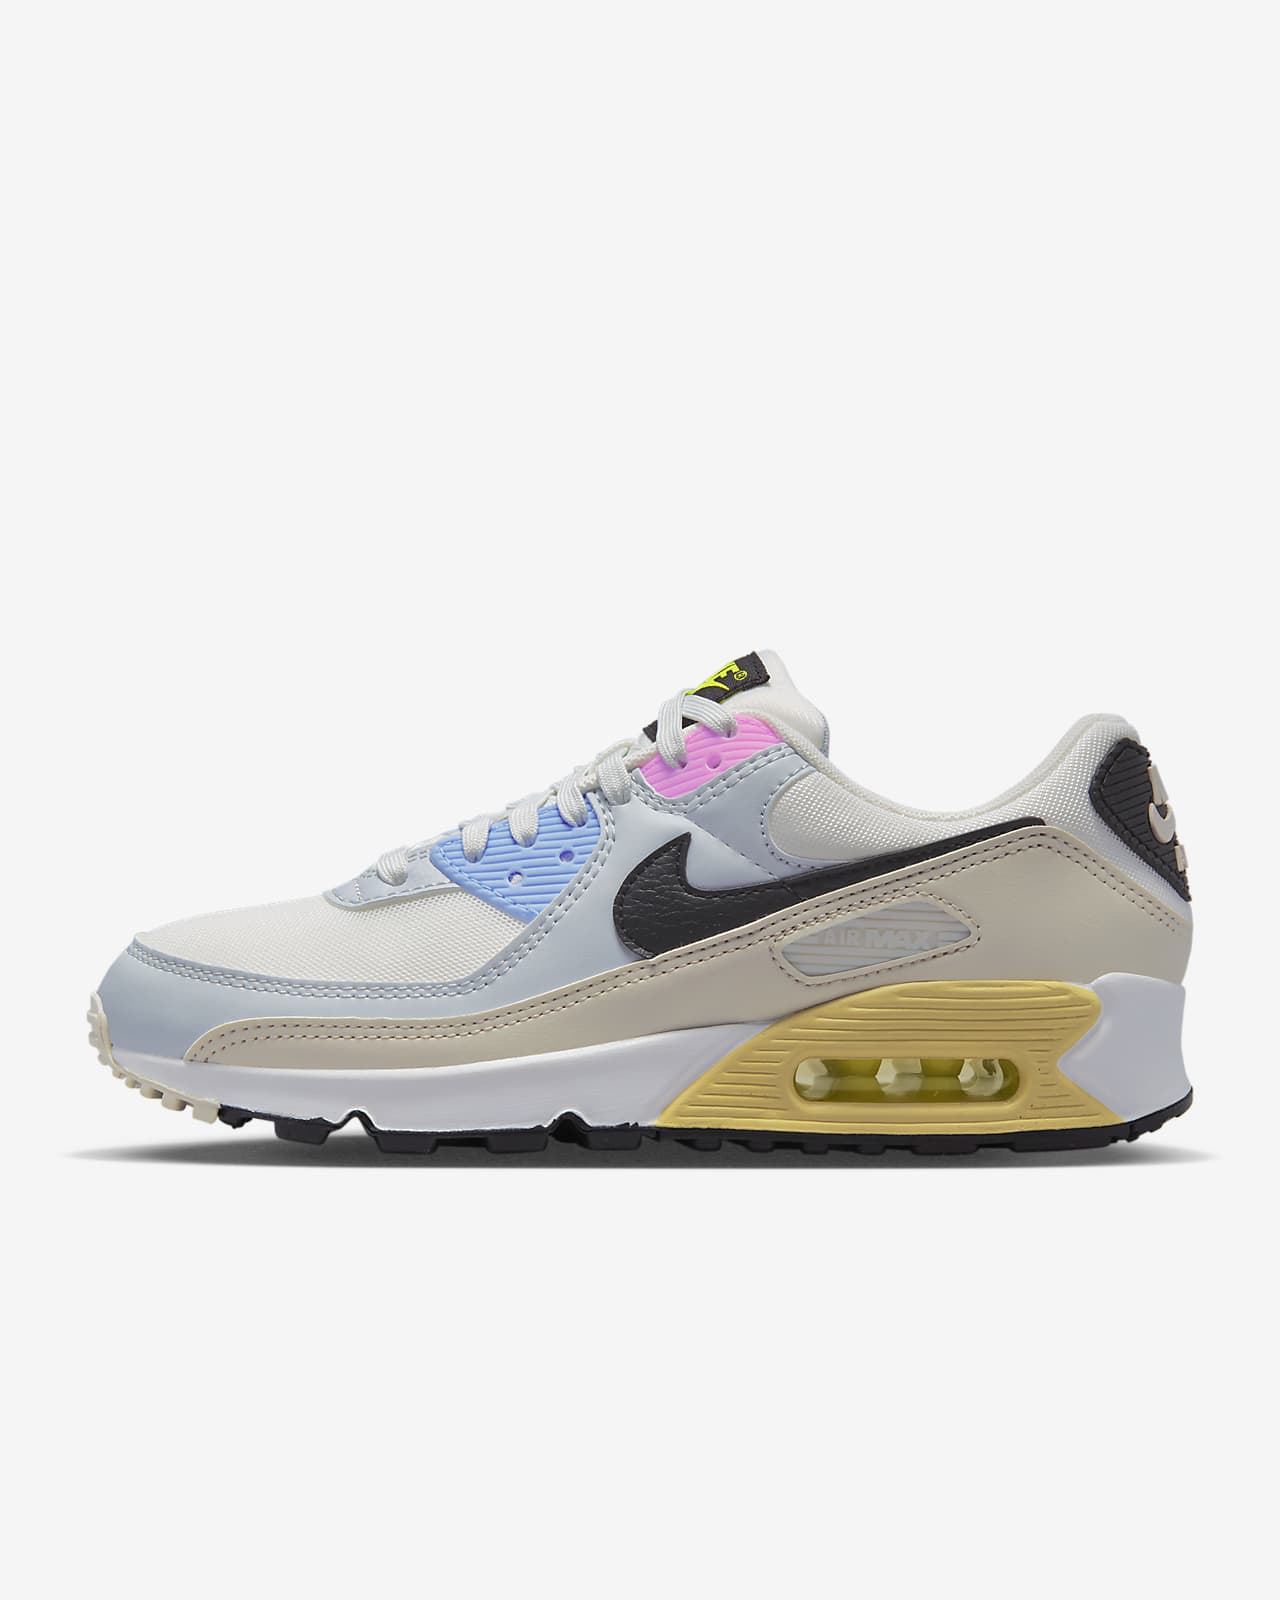 onthouden Immoraliteit software Nike Air Max 90 Women's Shoes. Nike.com